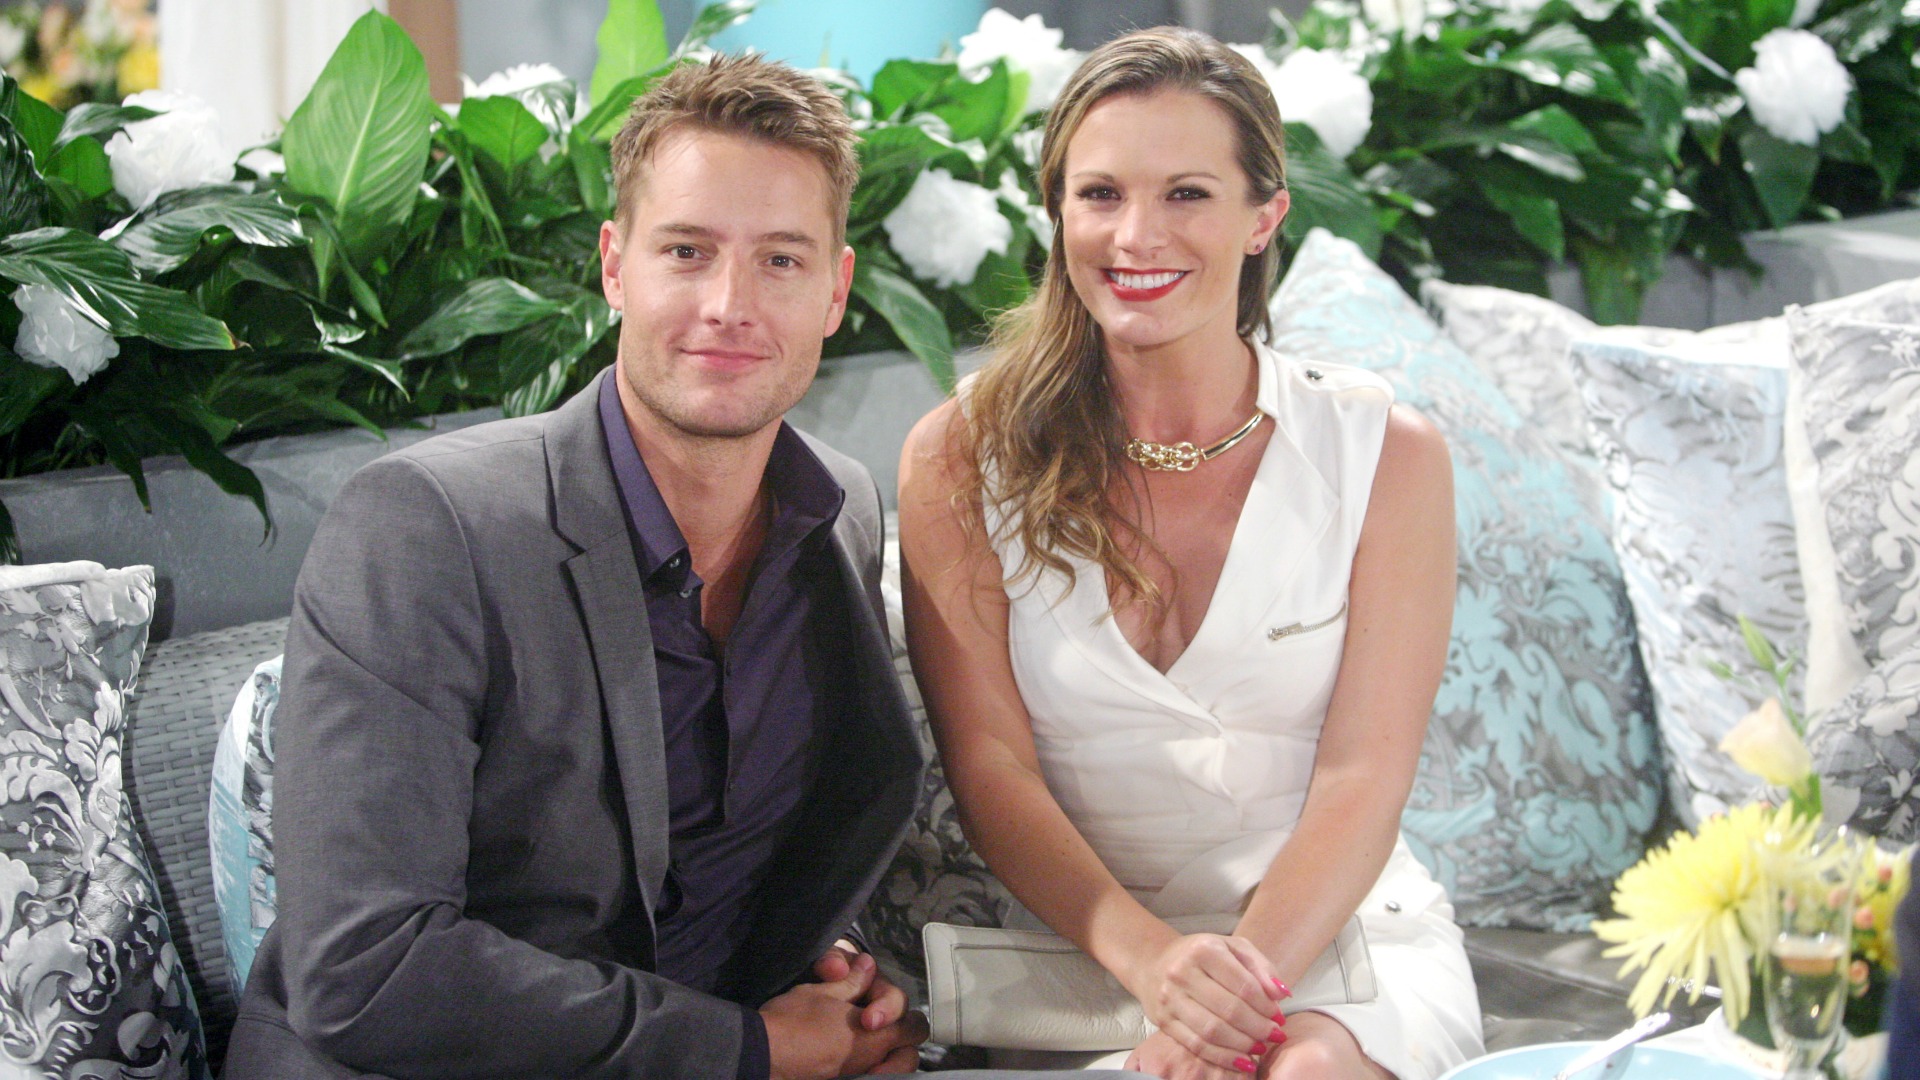 How do you and Melissa Claire Egan prepare for your scenes together?